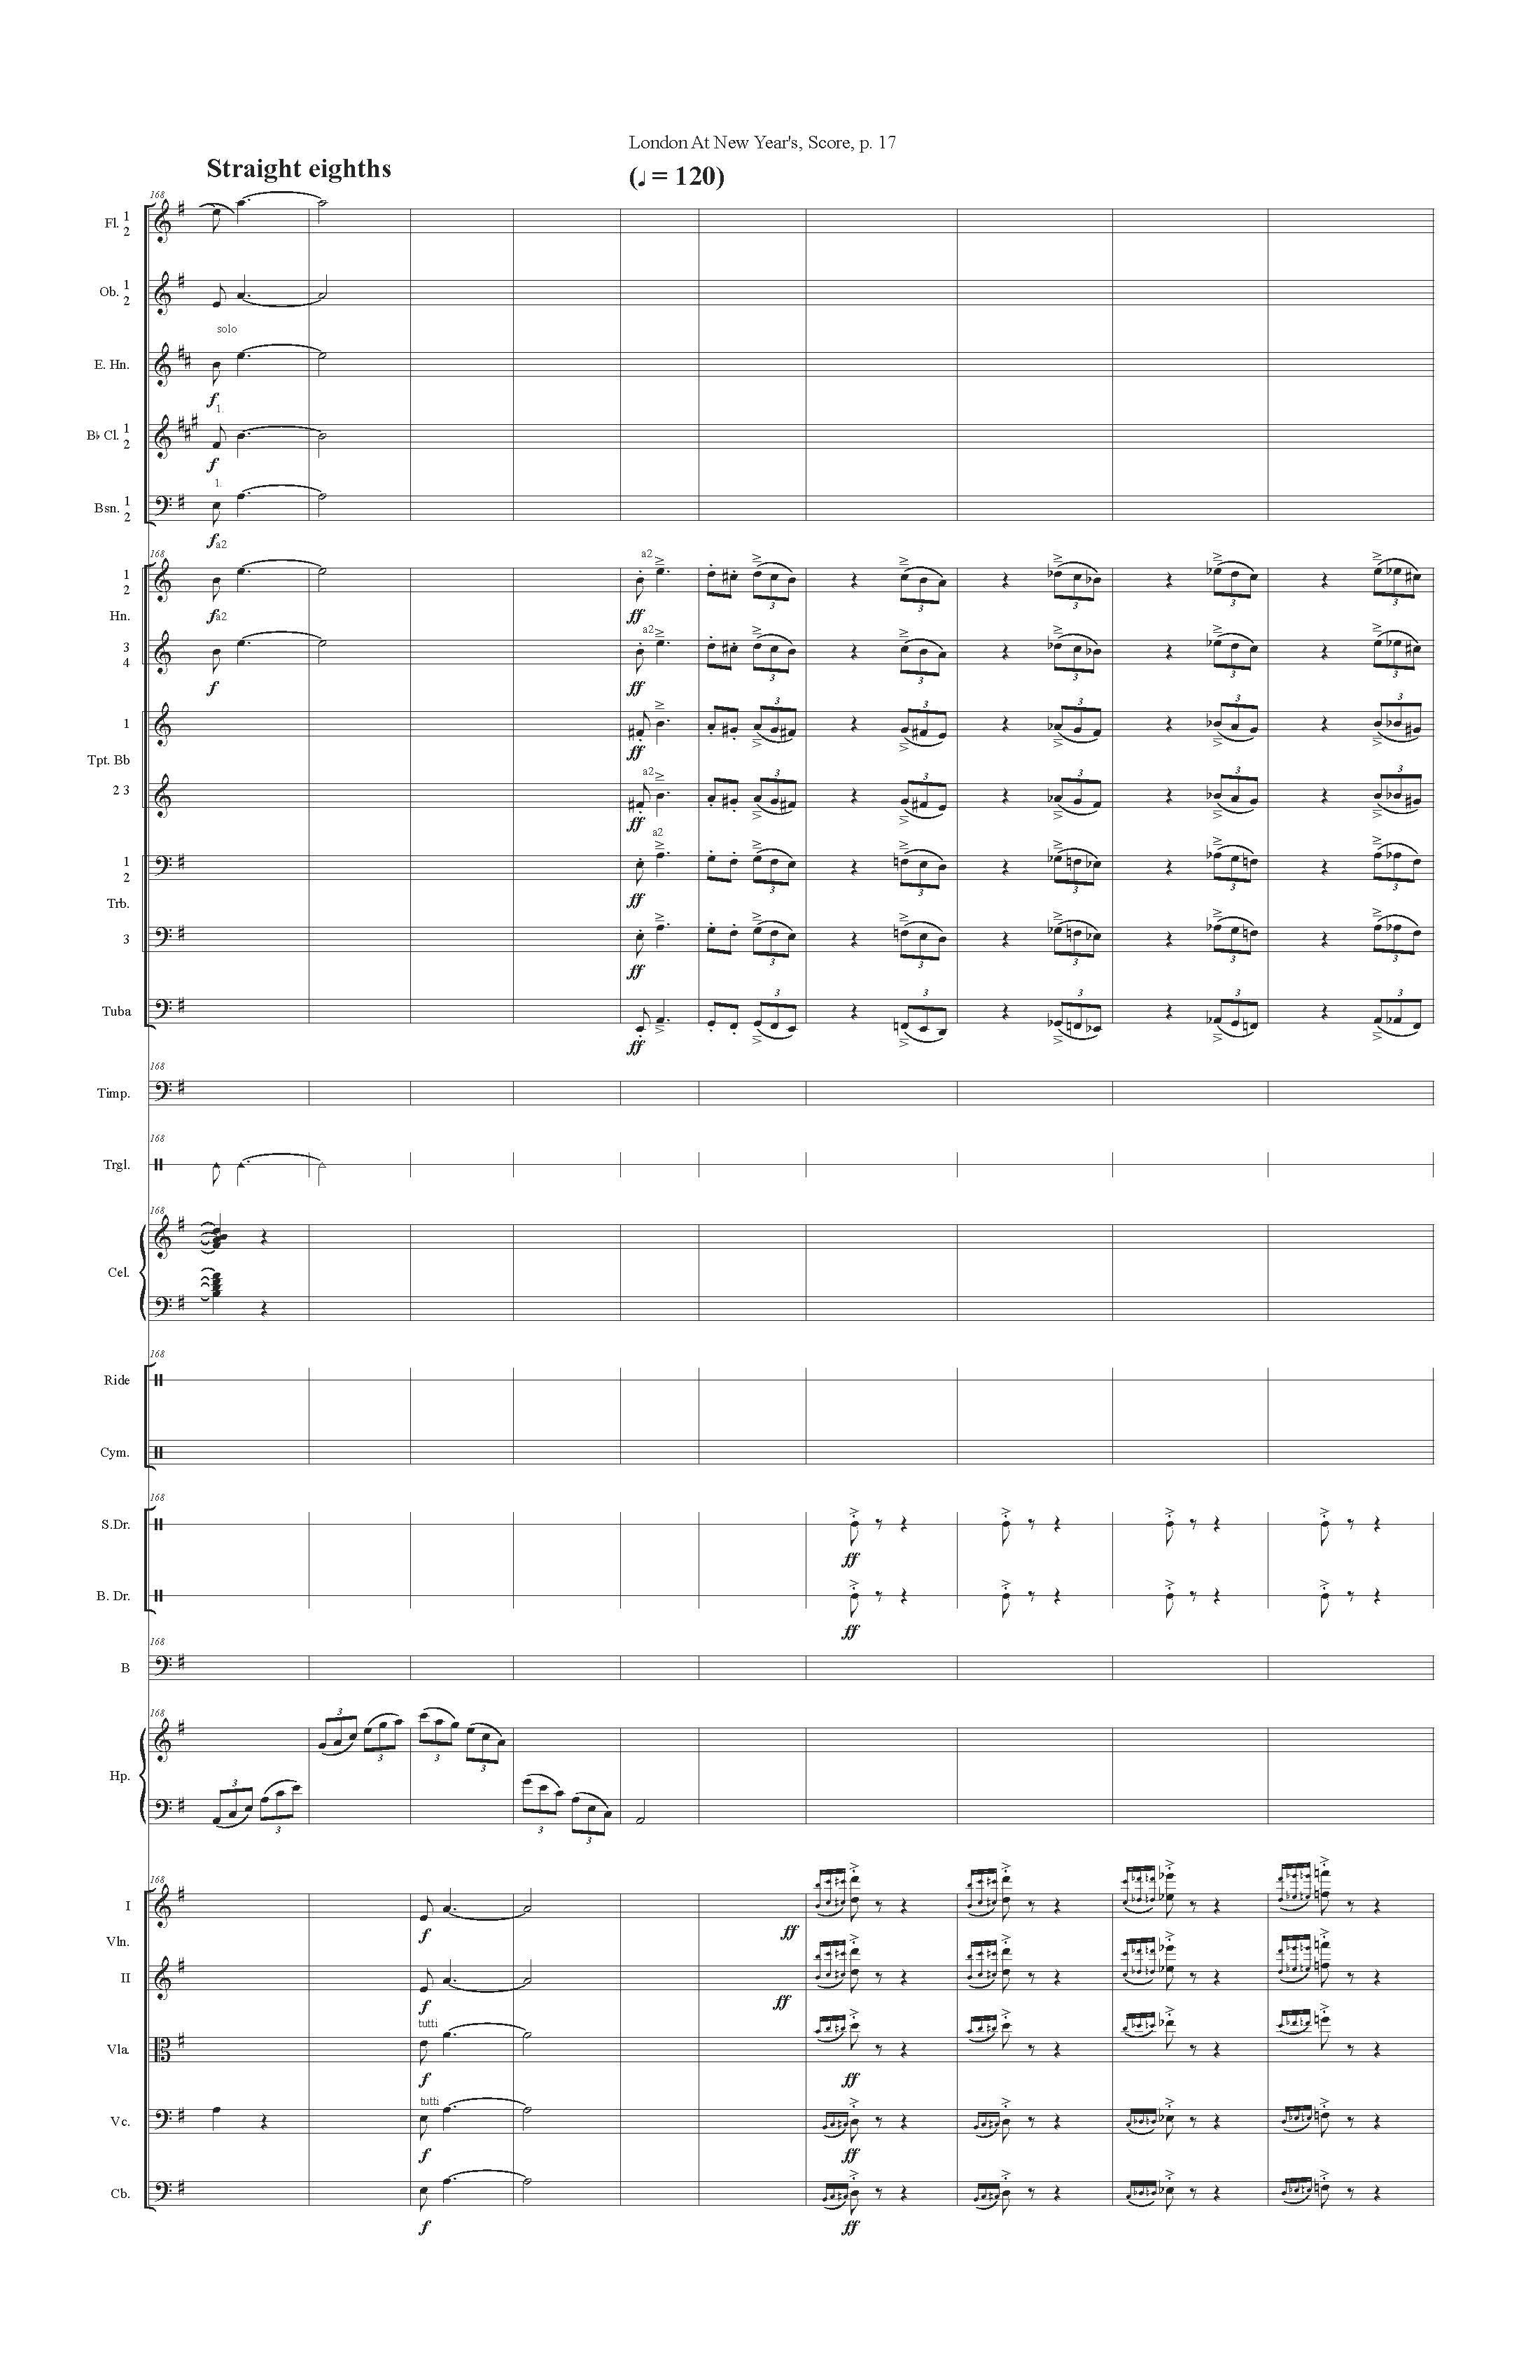 LONDON AT NEW YEARS ORCH - Score_Page_17.jpg